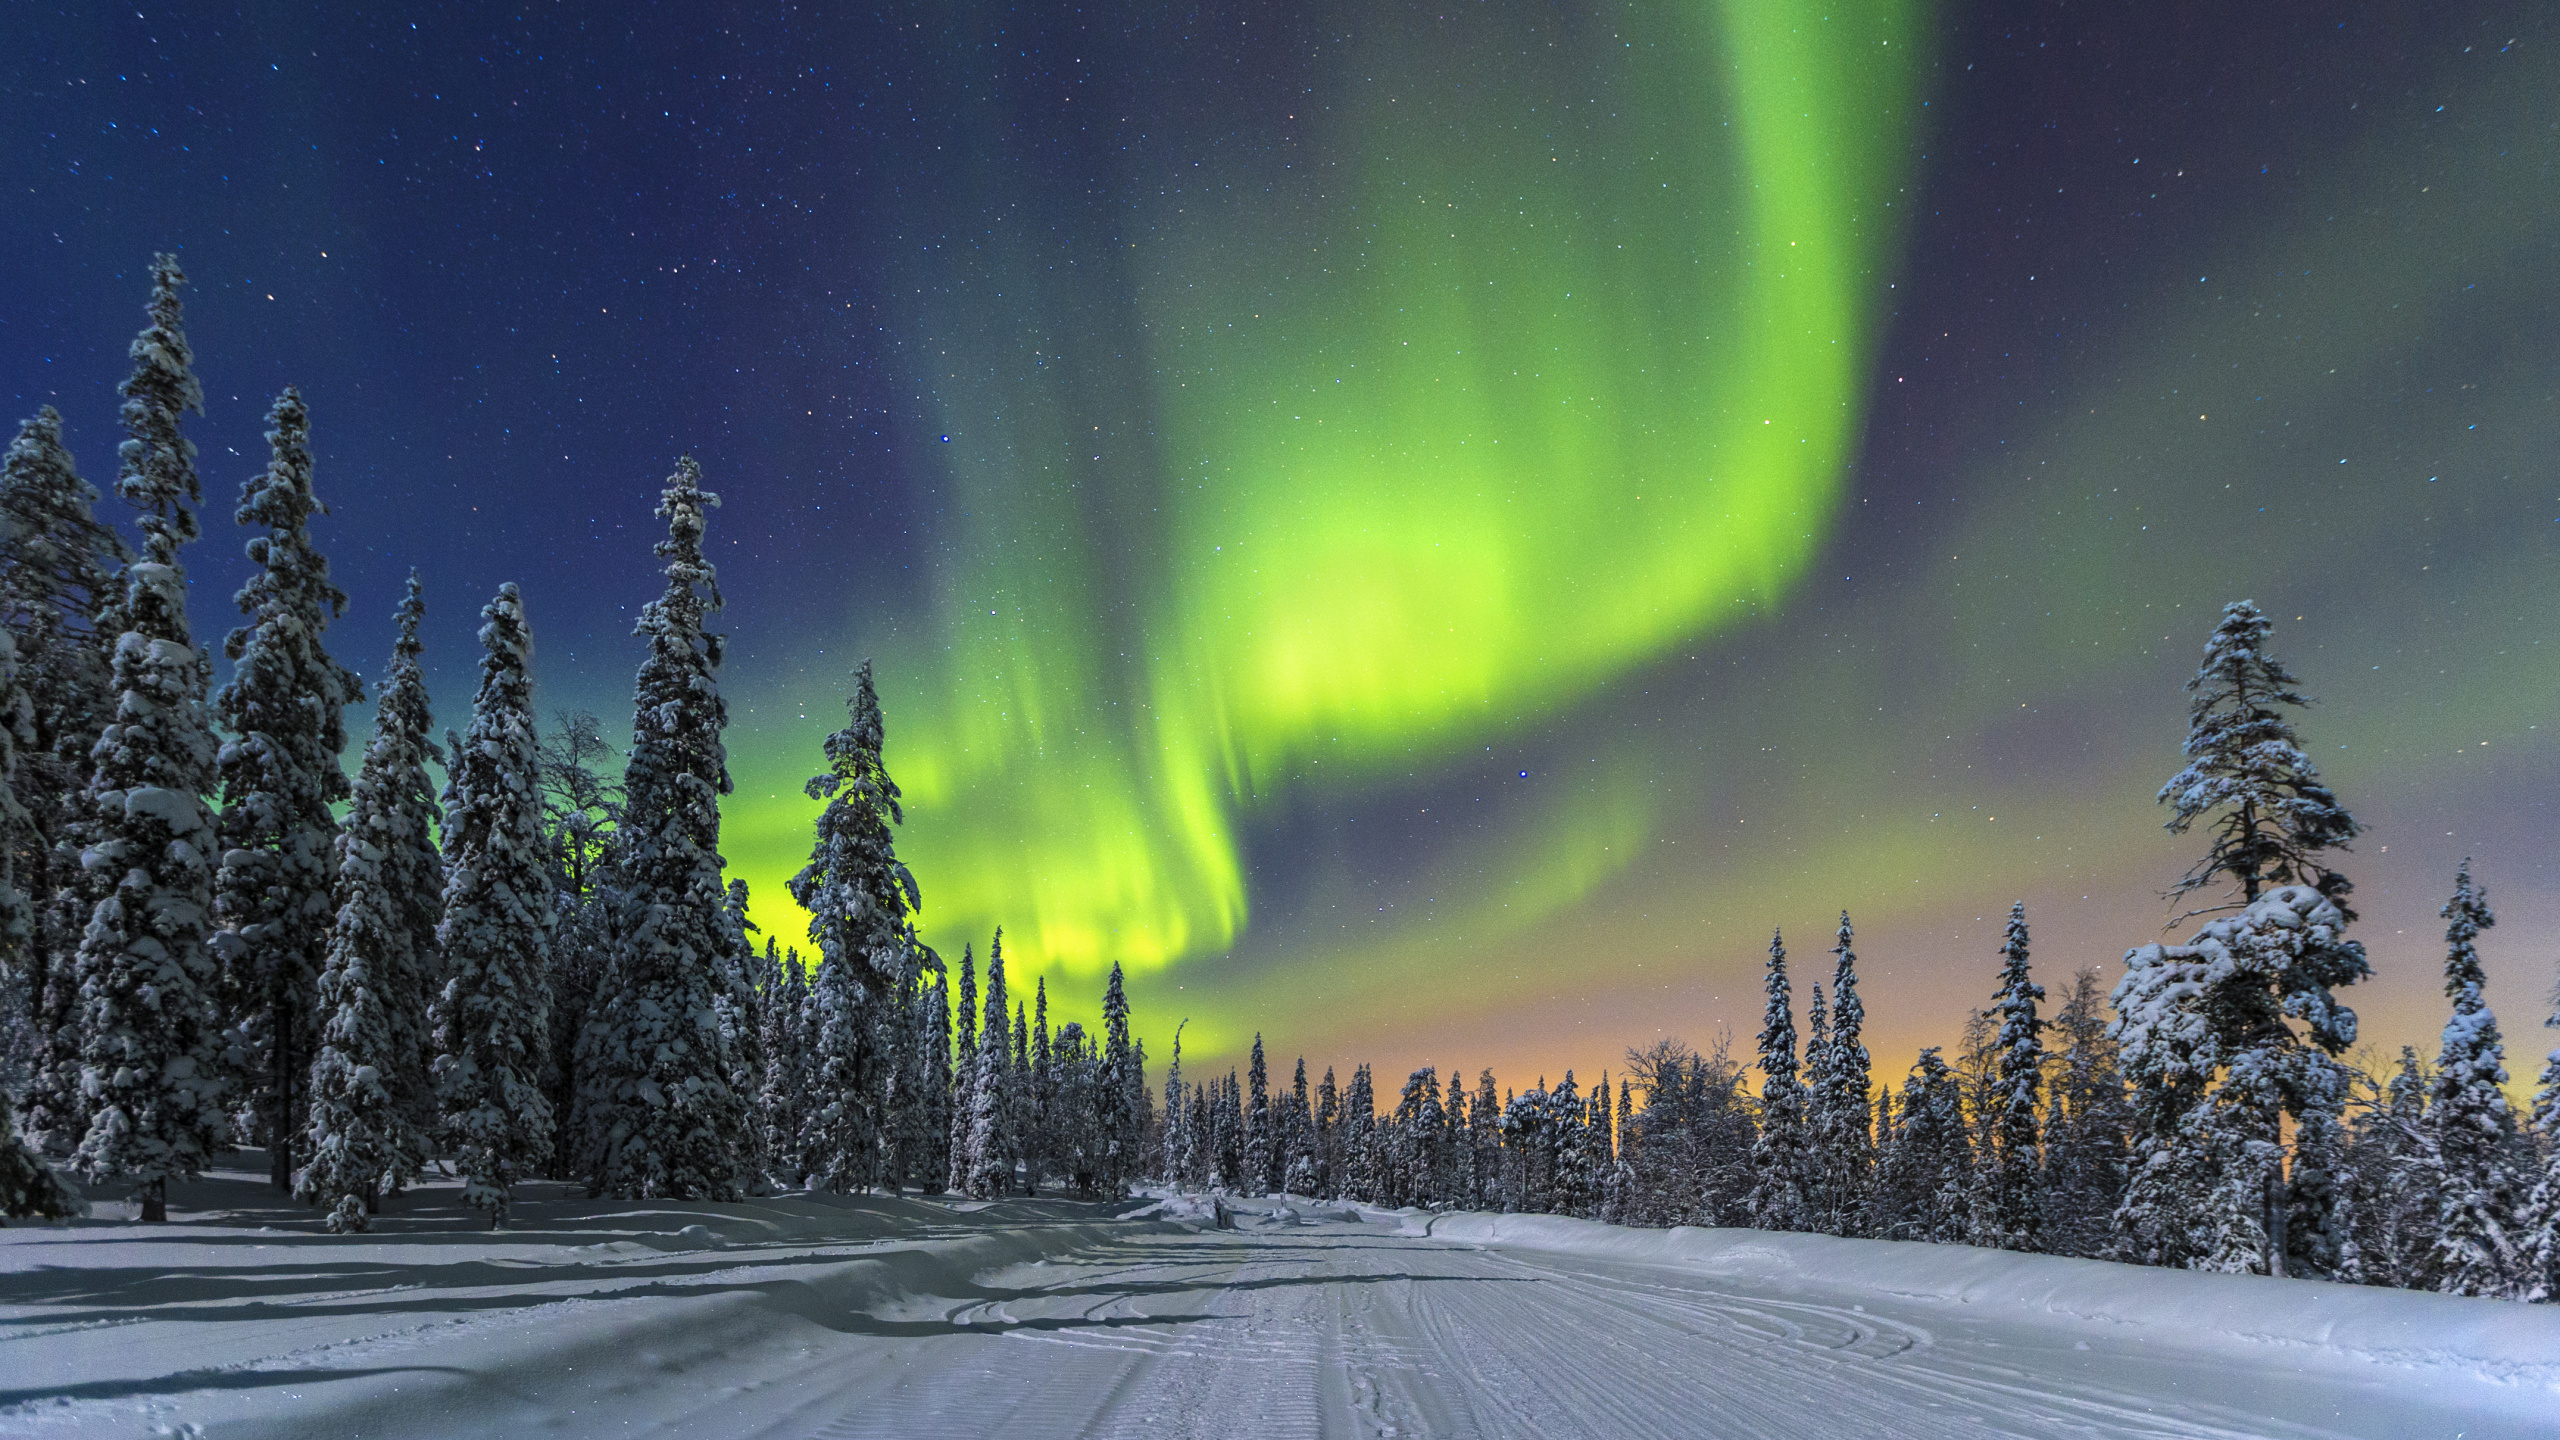 Green Aurora Lights Over Snow Covered Road During Night Time. Wallpaper in 2560x1440 Resolution